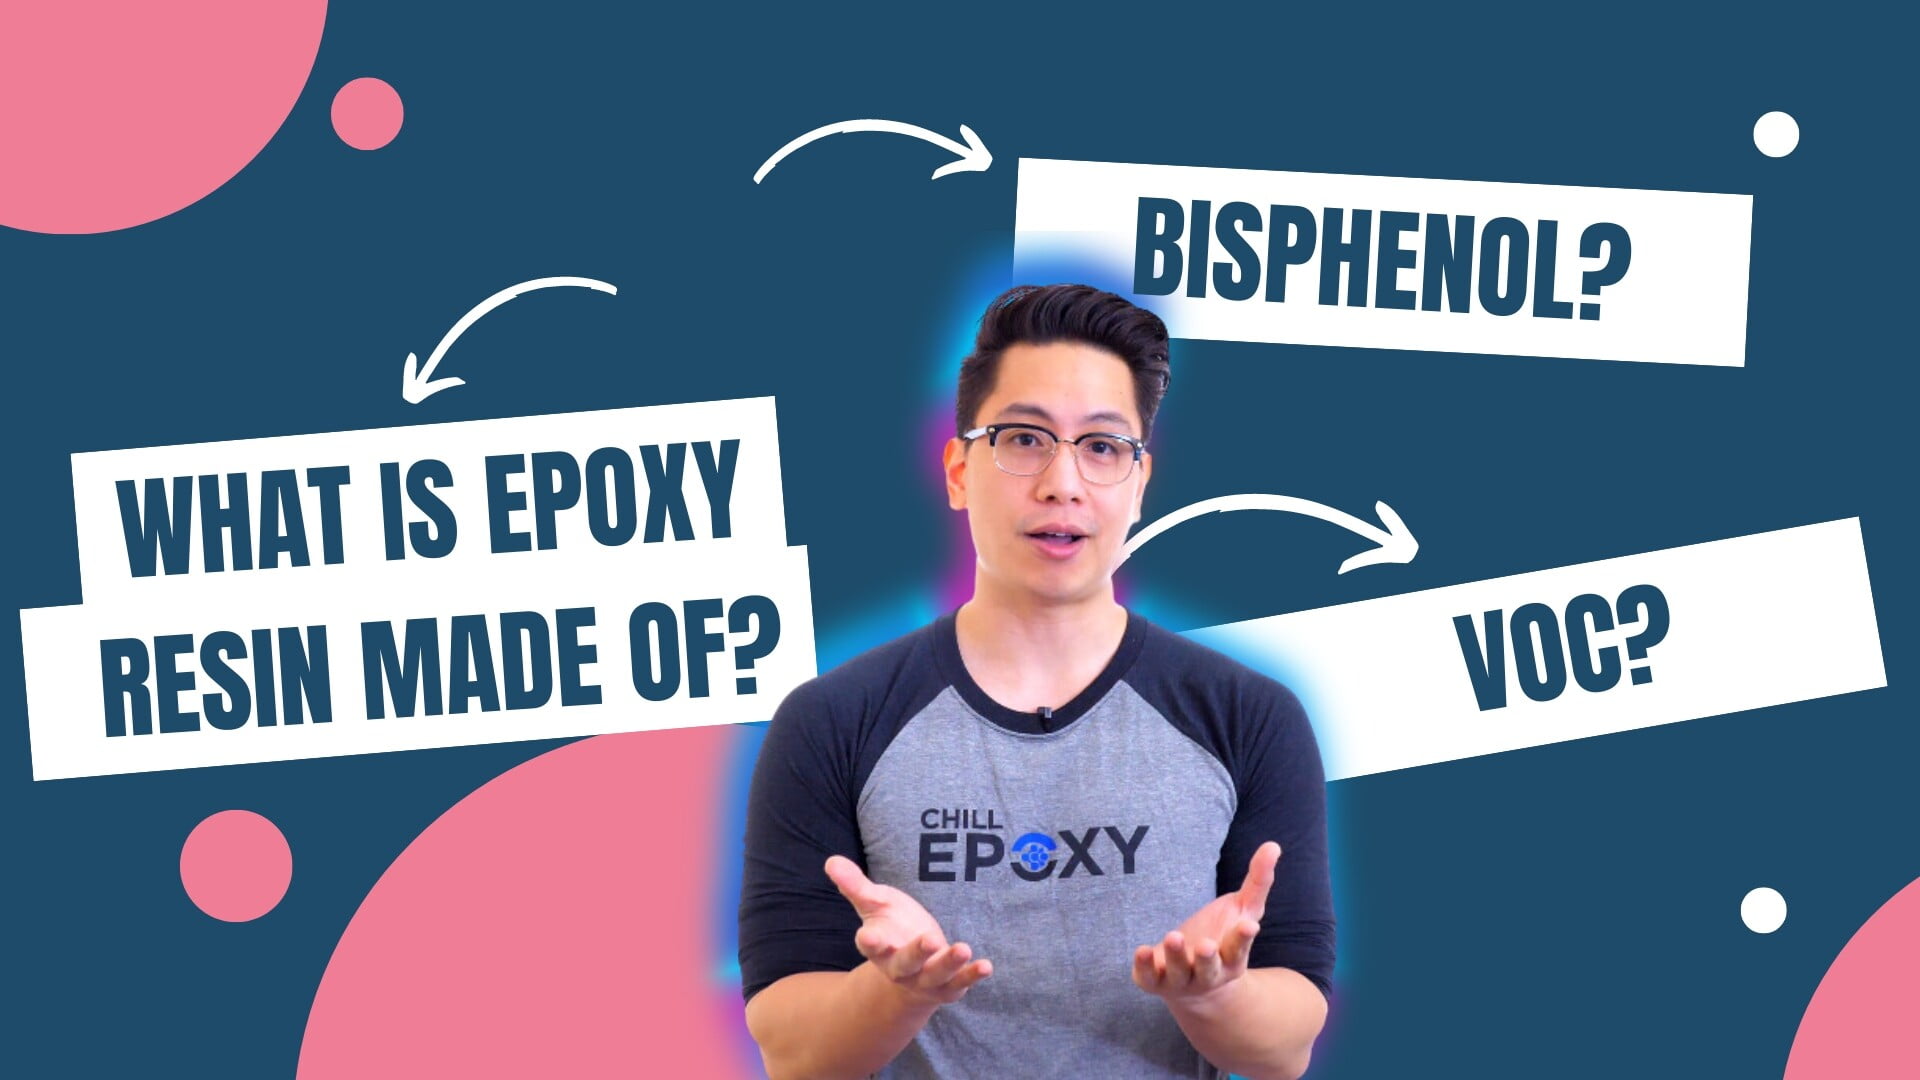 What is epoxy resin made of?